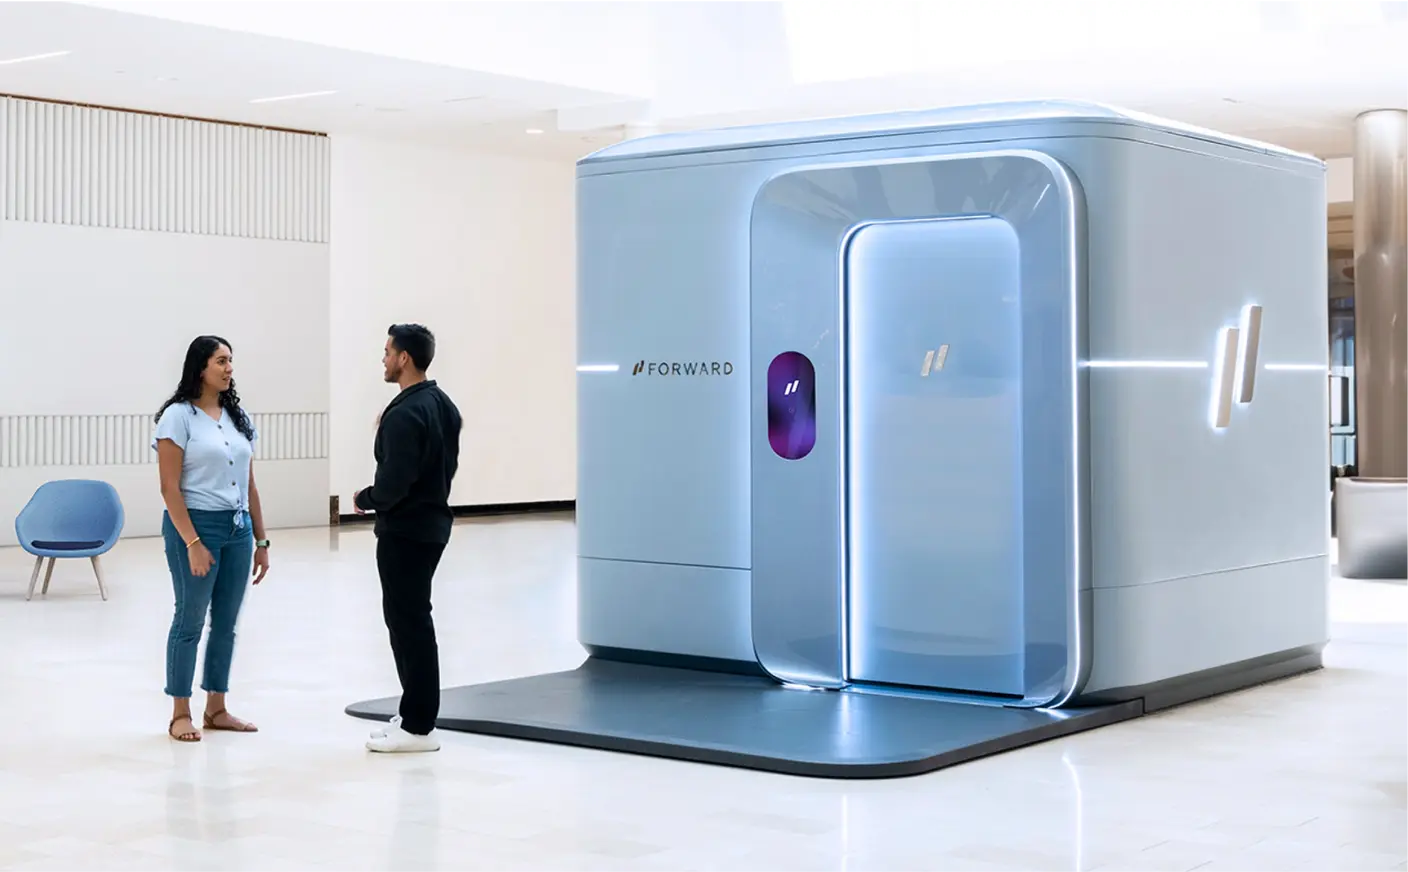 Two people are standing and talking in front of a sleek, modern pod labeled "Forward" in a clean, spacious indoor area. The scene exudes the innovative spirit of health tech companies, hinting at the future of healthcare in 2024.